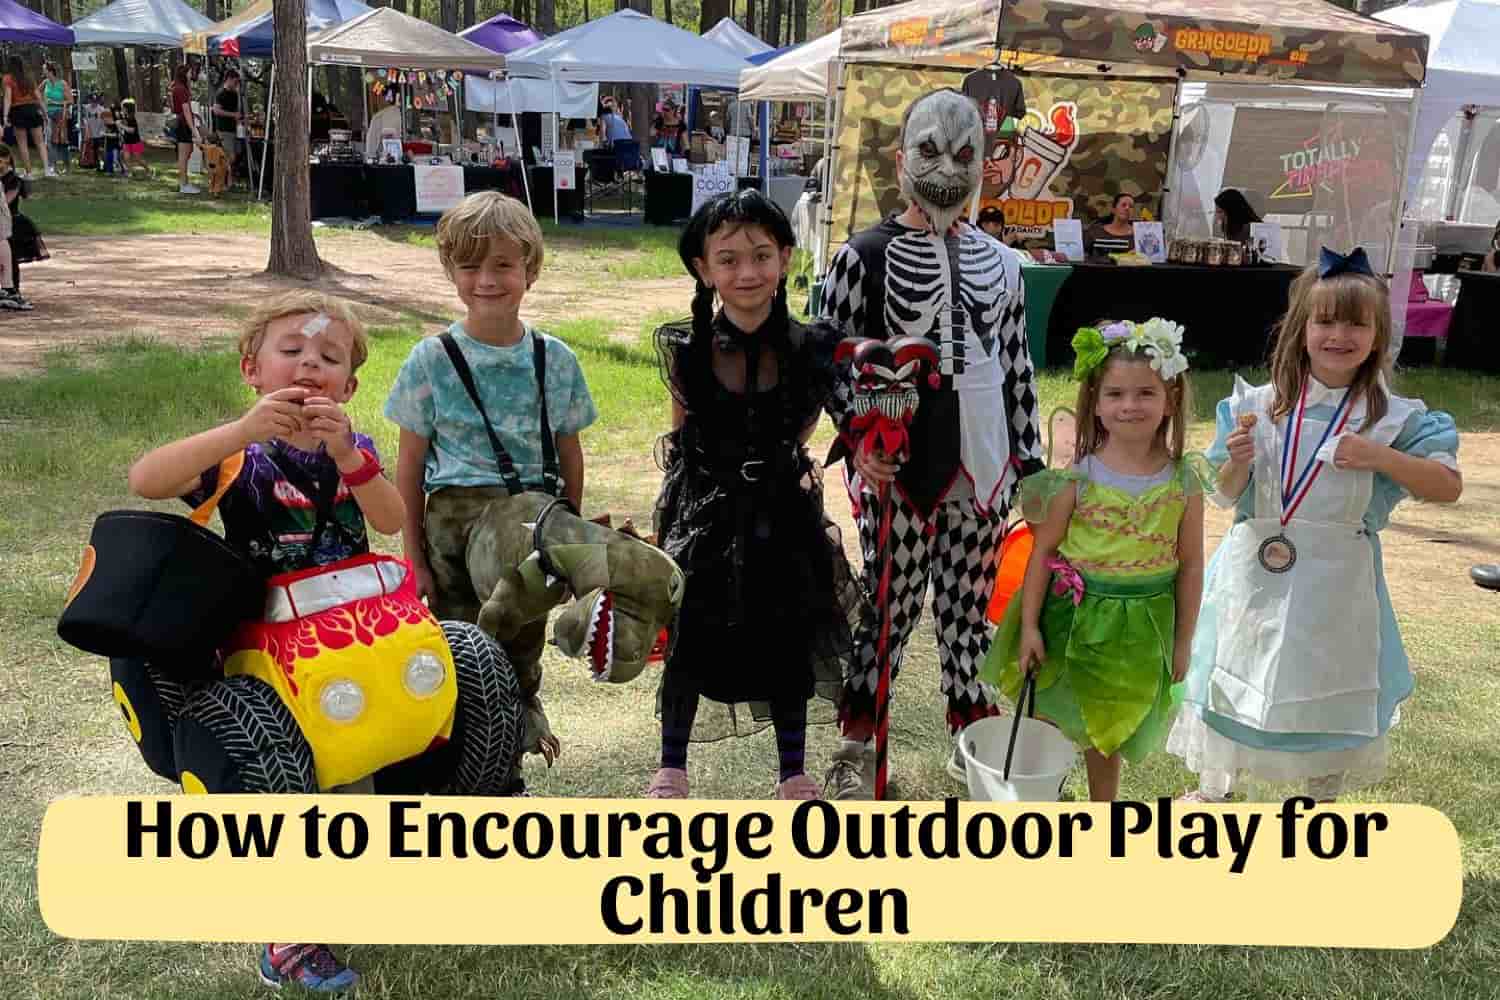 How to Encourage Outdoor Play for Children